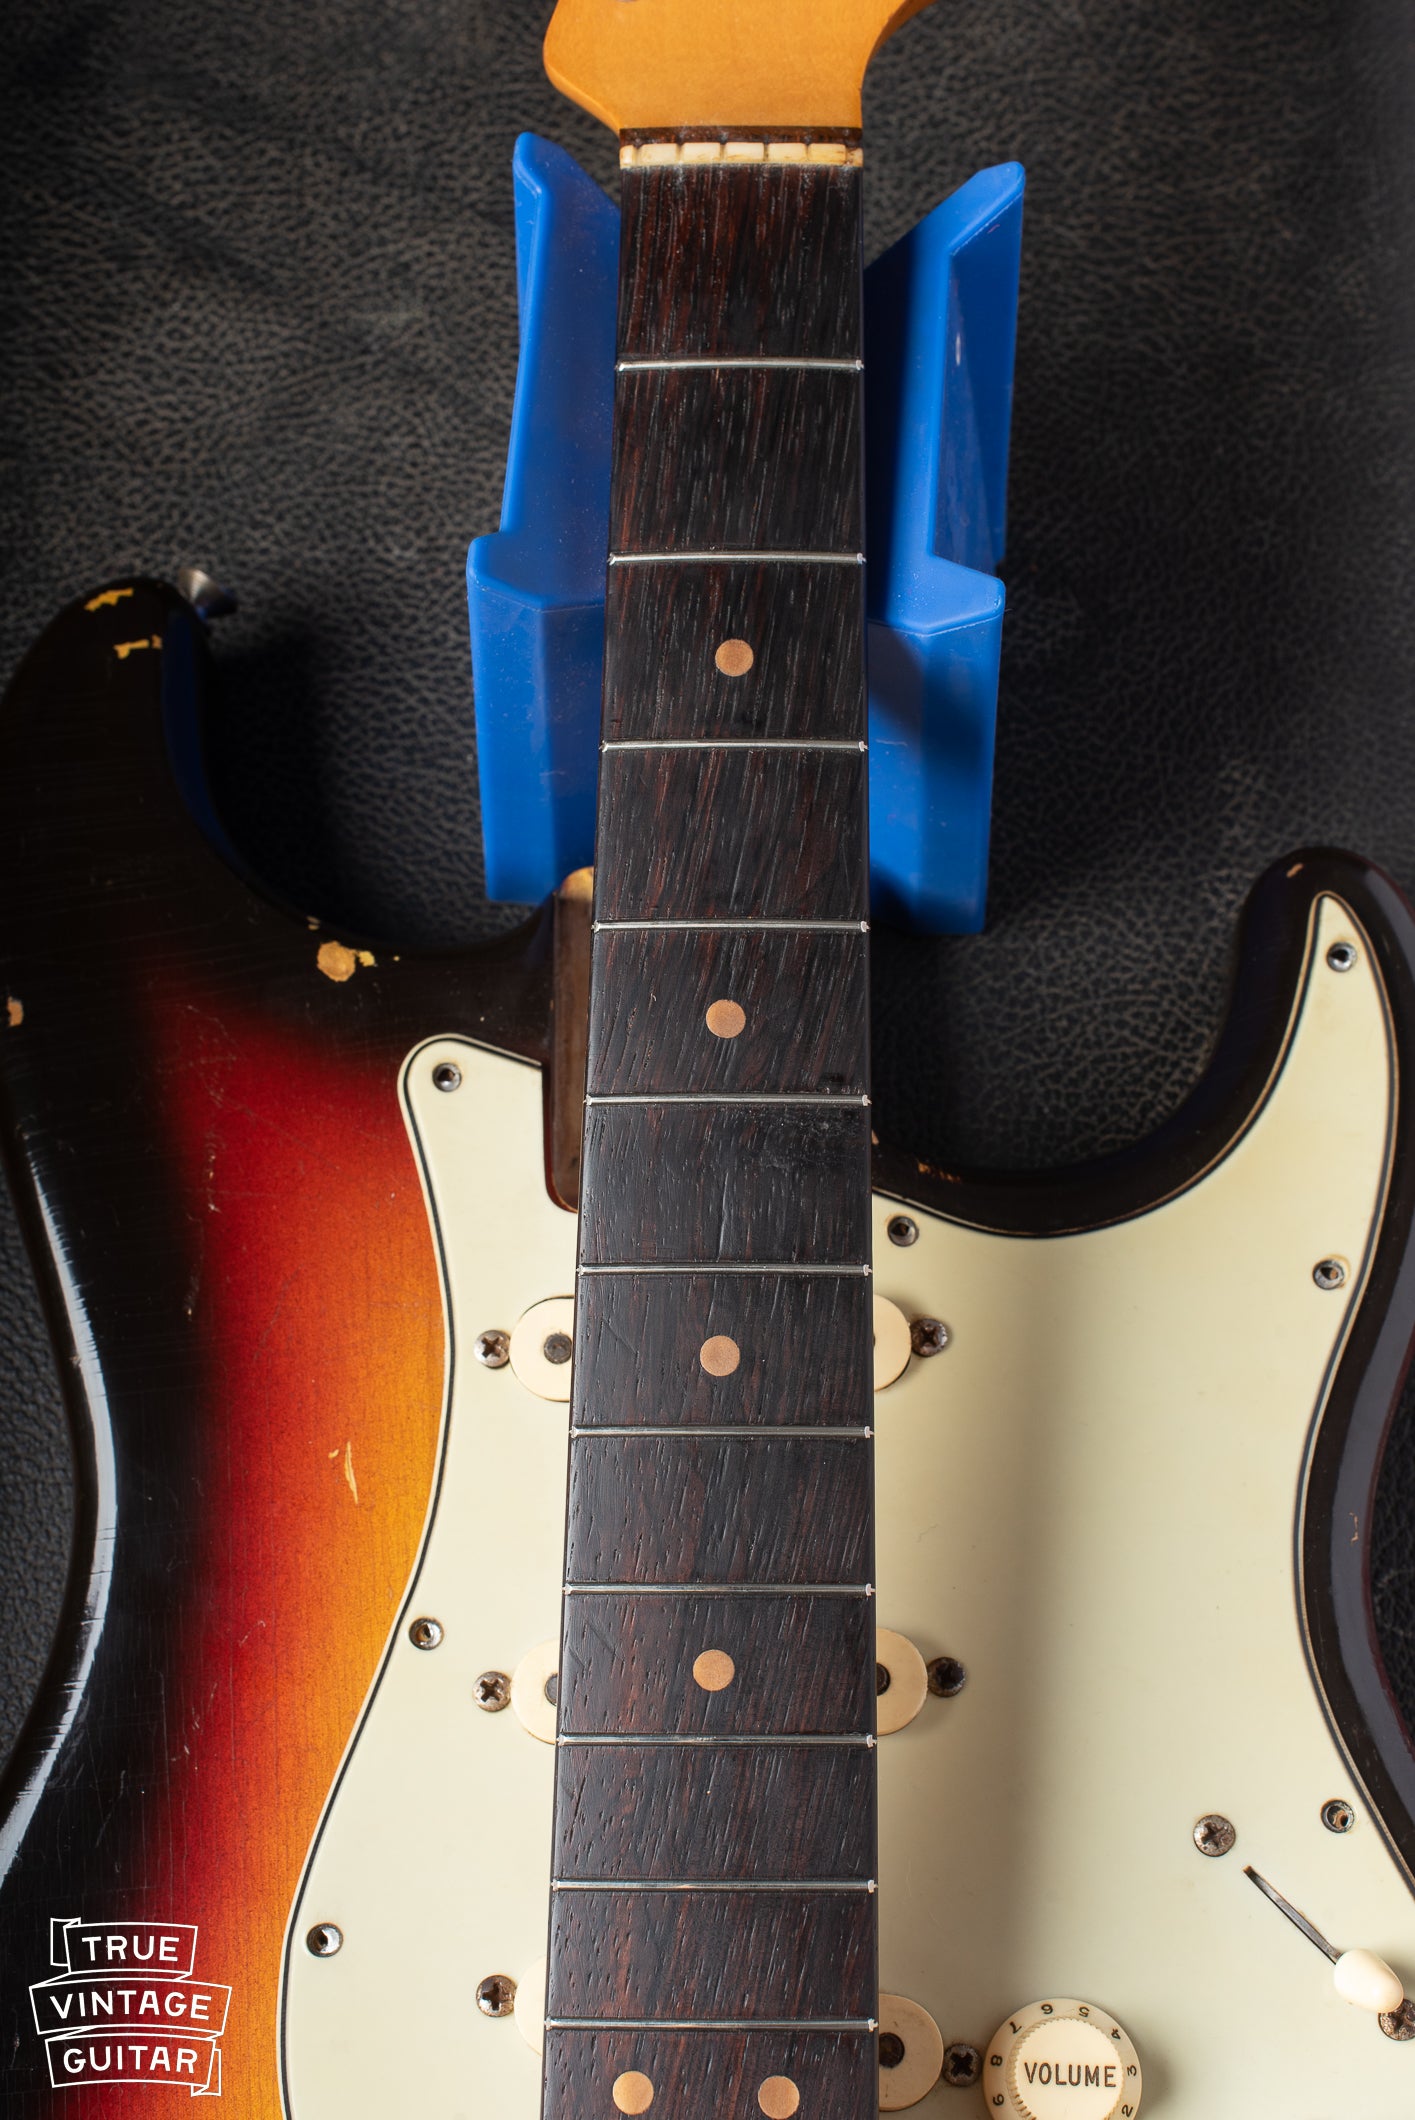 Rosewood fretboard with clay dots. Factory style refret. 